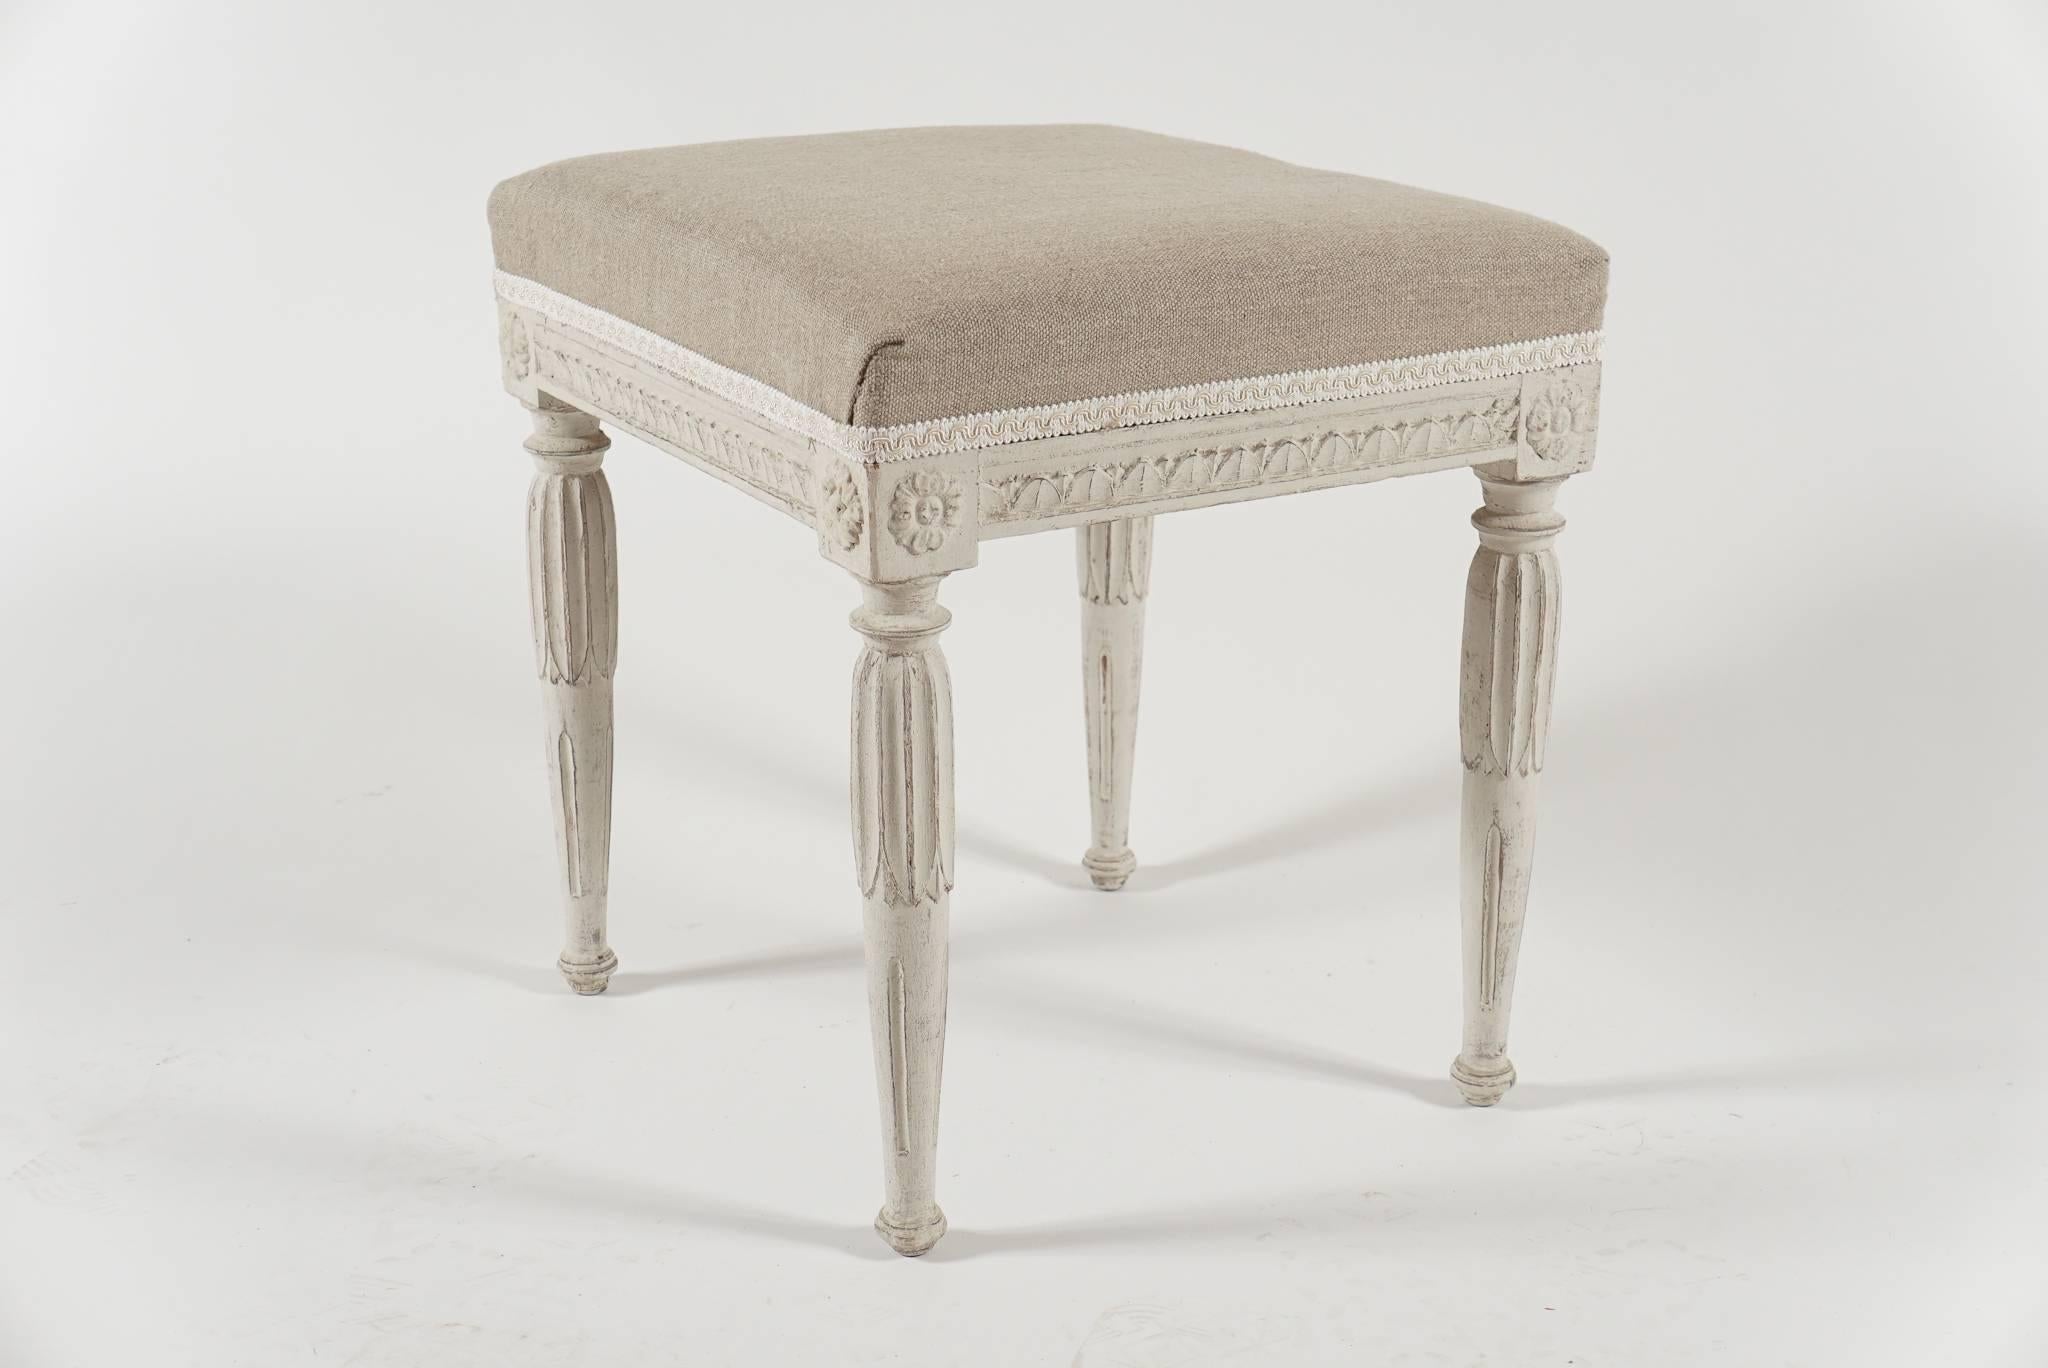 A near pair of circa 1790, Swedish Gustavian period wood stools in original paint having upholstered seats above carved 'lamb's tongue' seat rails joining rosette carved corner blocks on fluted, turned, and carved acanthus legs.  One measures 16.5